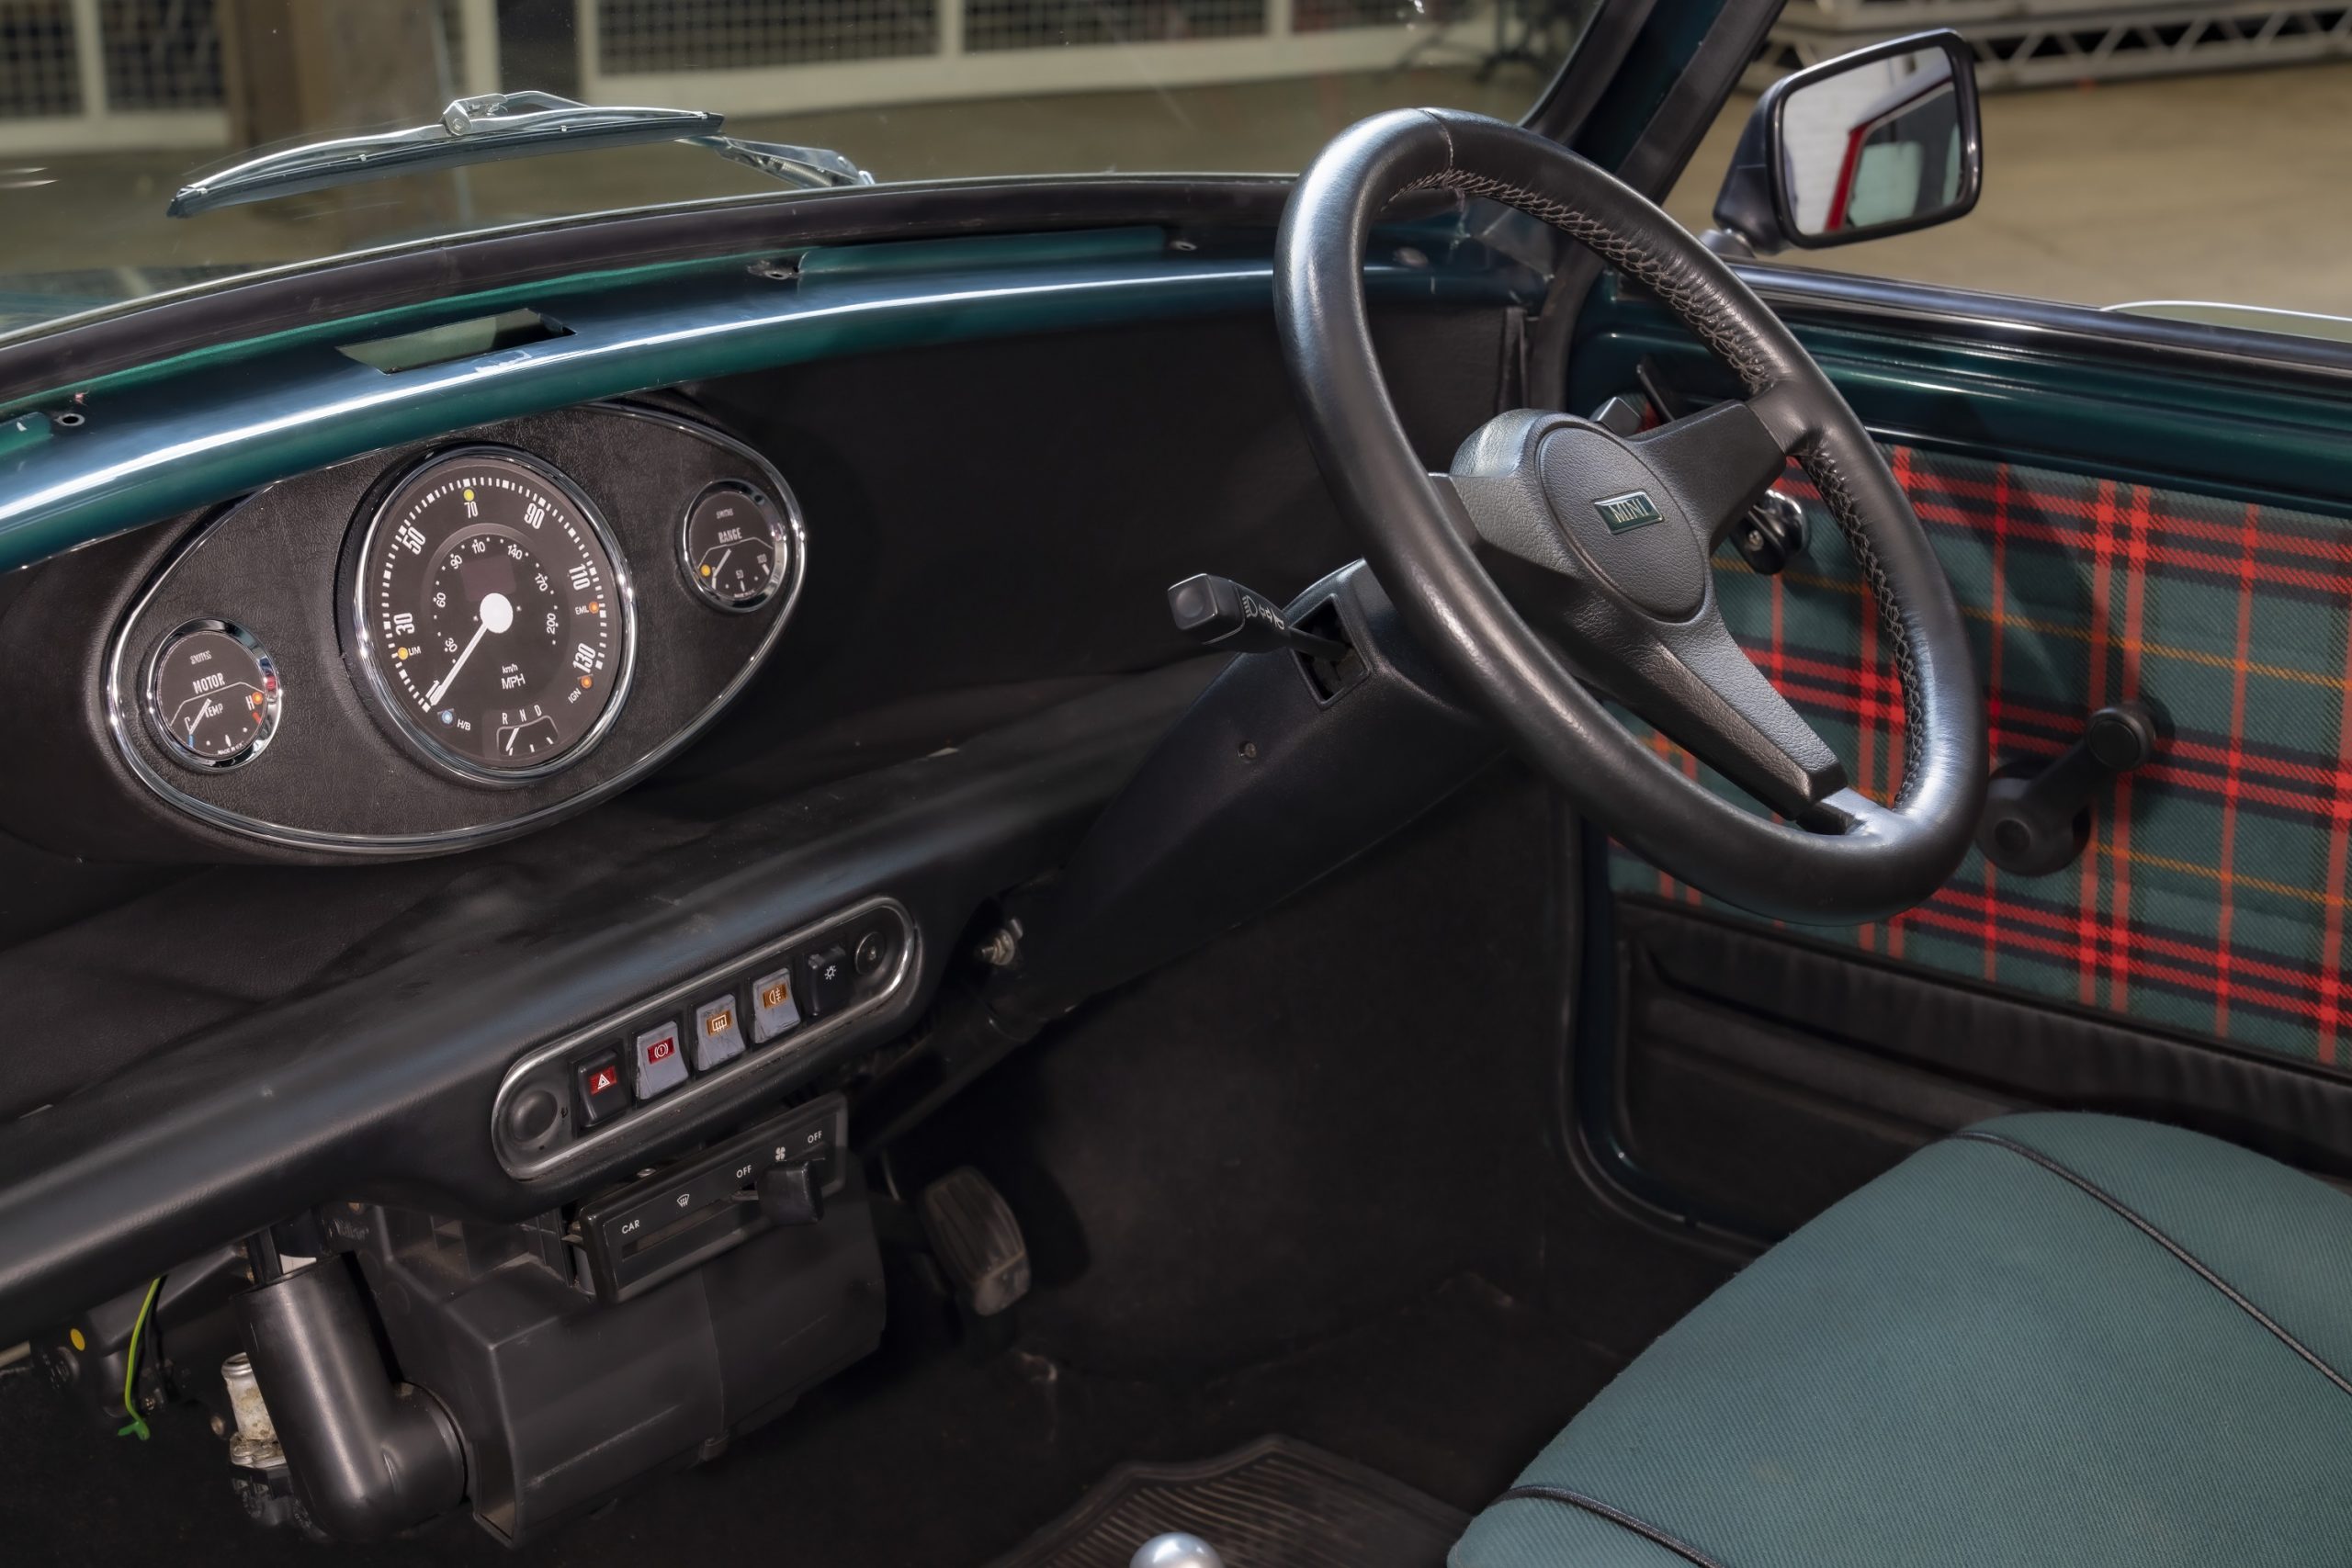 The interior of Mini's EV-swapped Cooper with plaid door inserts and green cloth seats